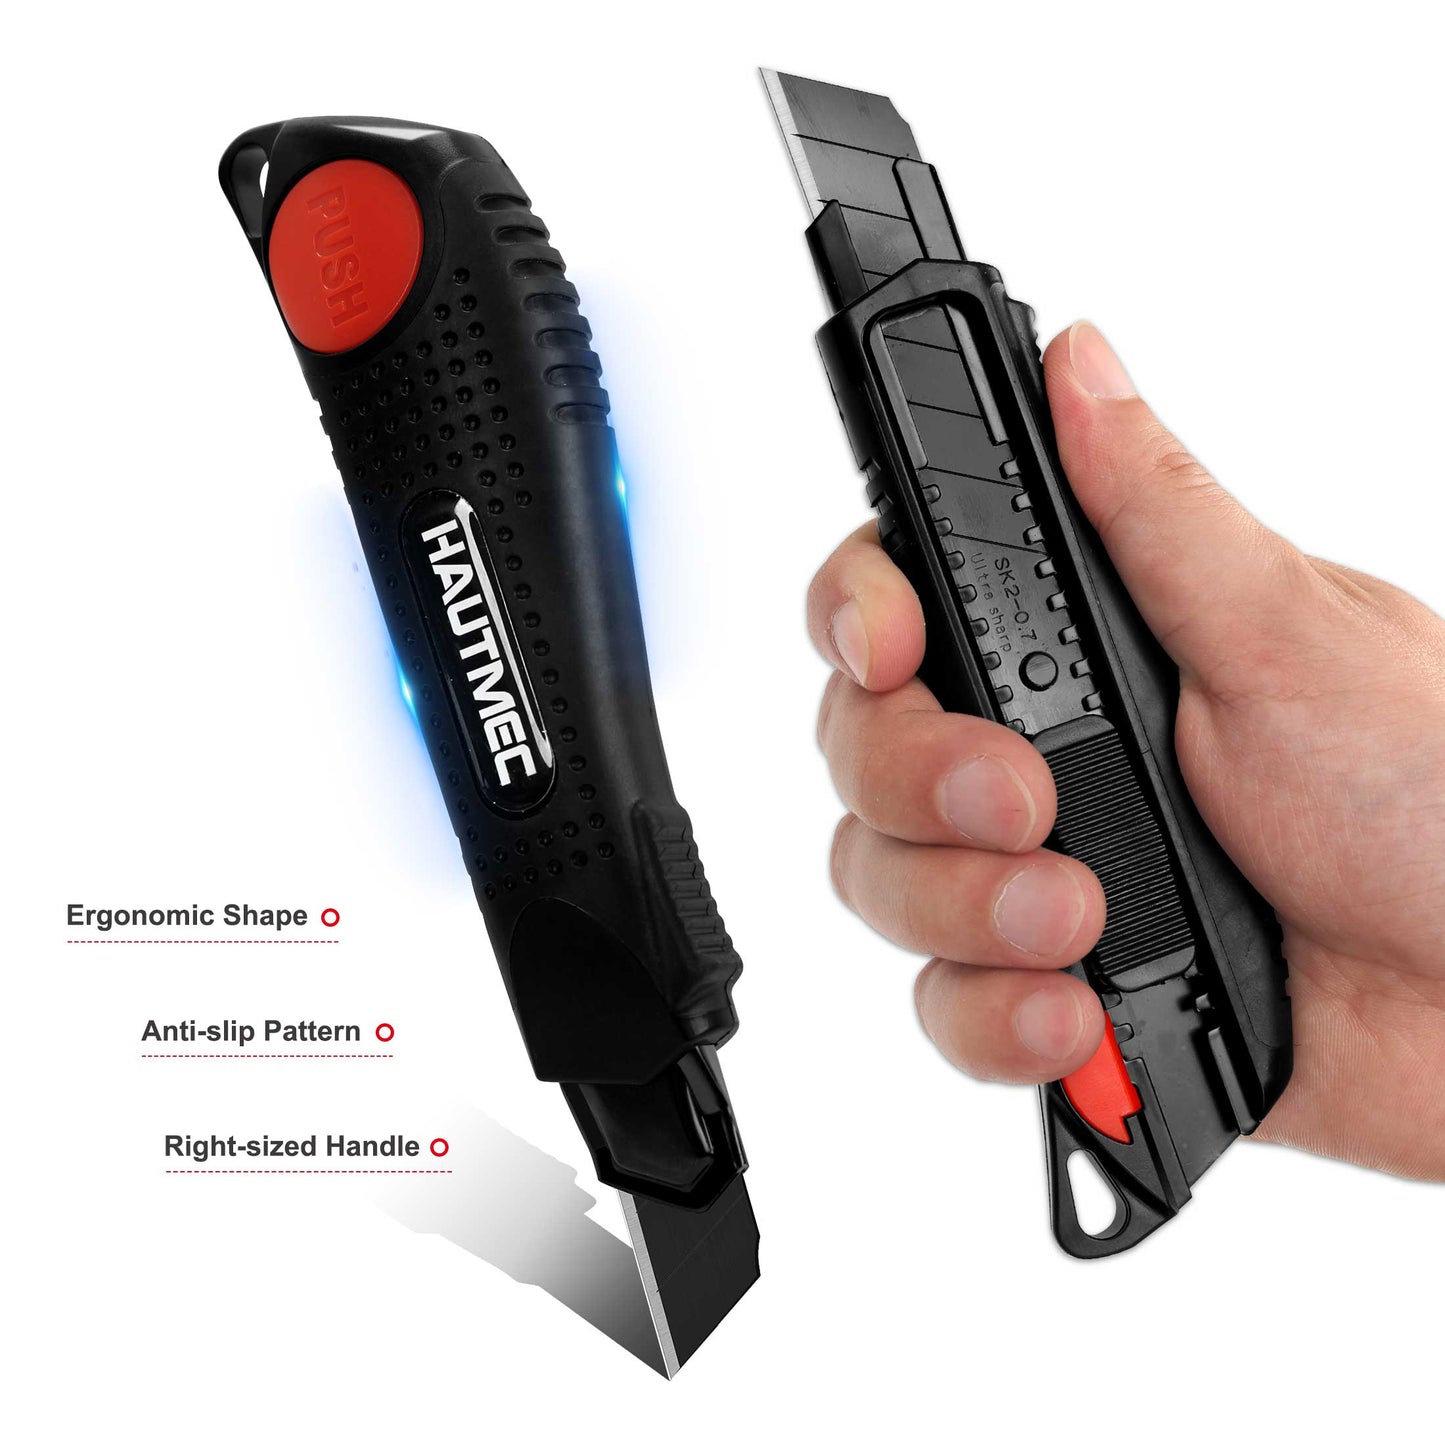 HAUTMEC 18mm Utility Knife Box Cutter with Quick Change Button and 10pcs Blade Set, Retractable Snap off Black SK2 Ultra Sharp Blade, Anti-Slip Ergonomic Rubber Handle HT0094-KN